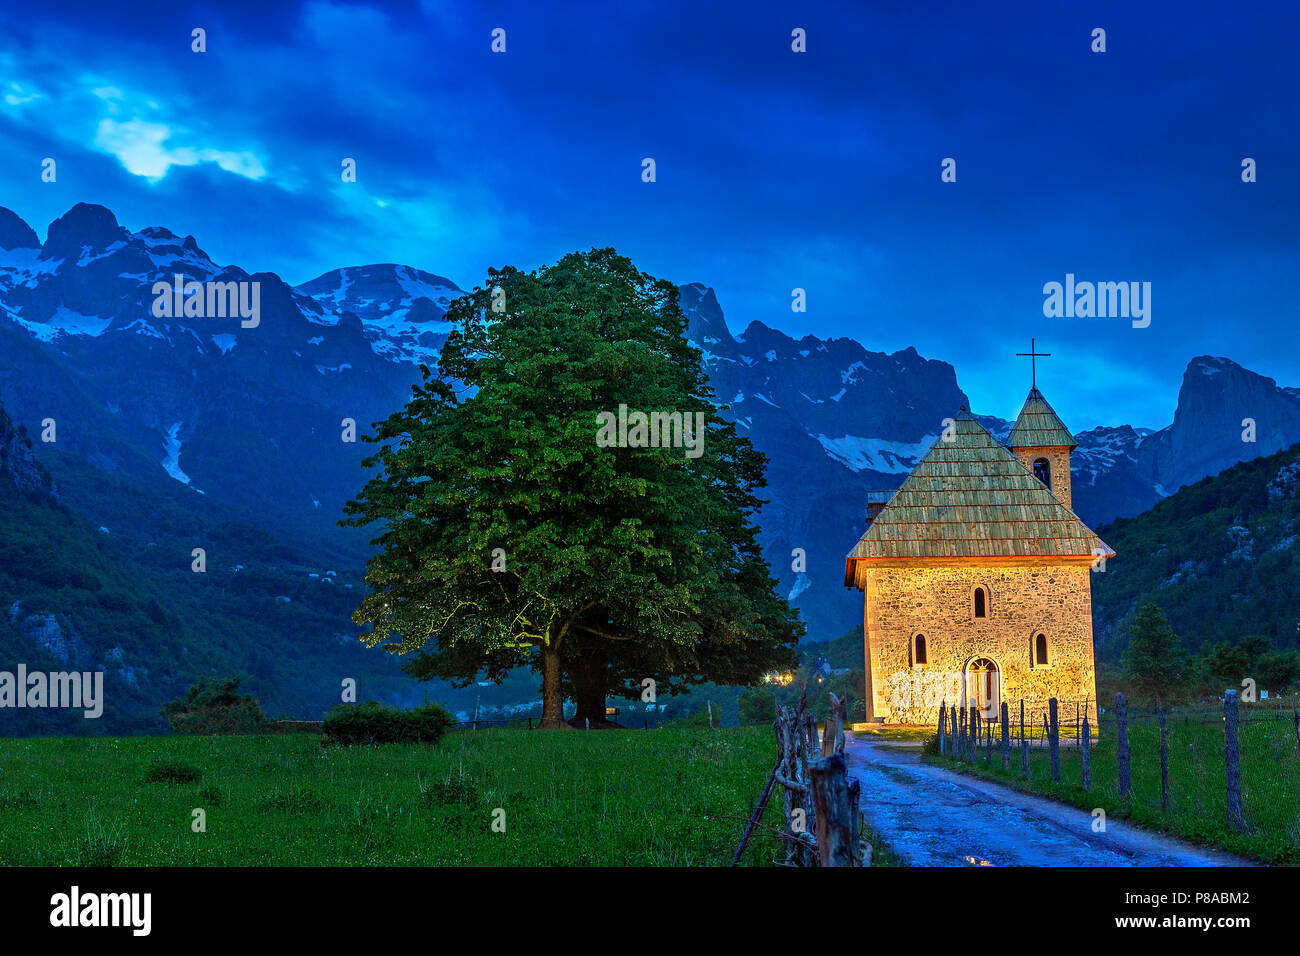 Church in the Thethi Village and snow capped mountains, at the twilight, in the Theth Valley, Albania Stock Photo